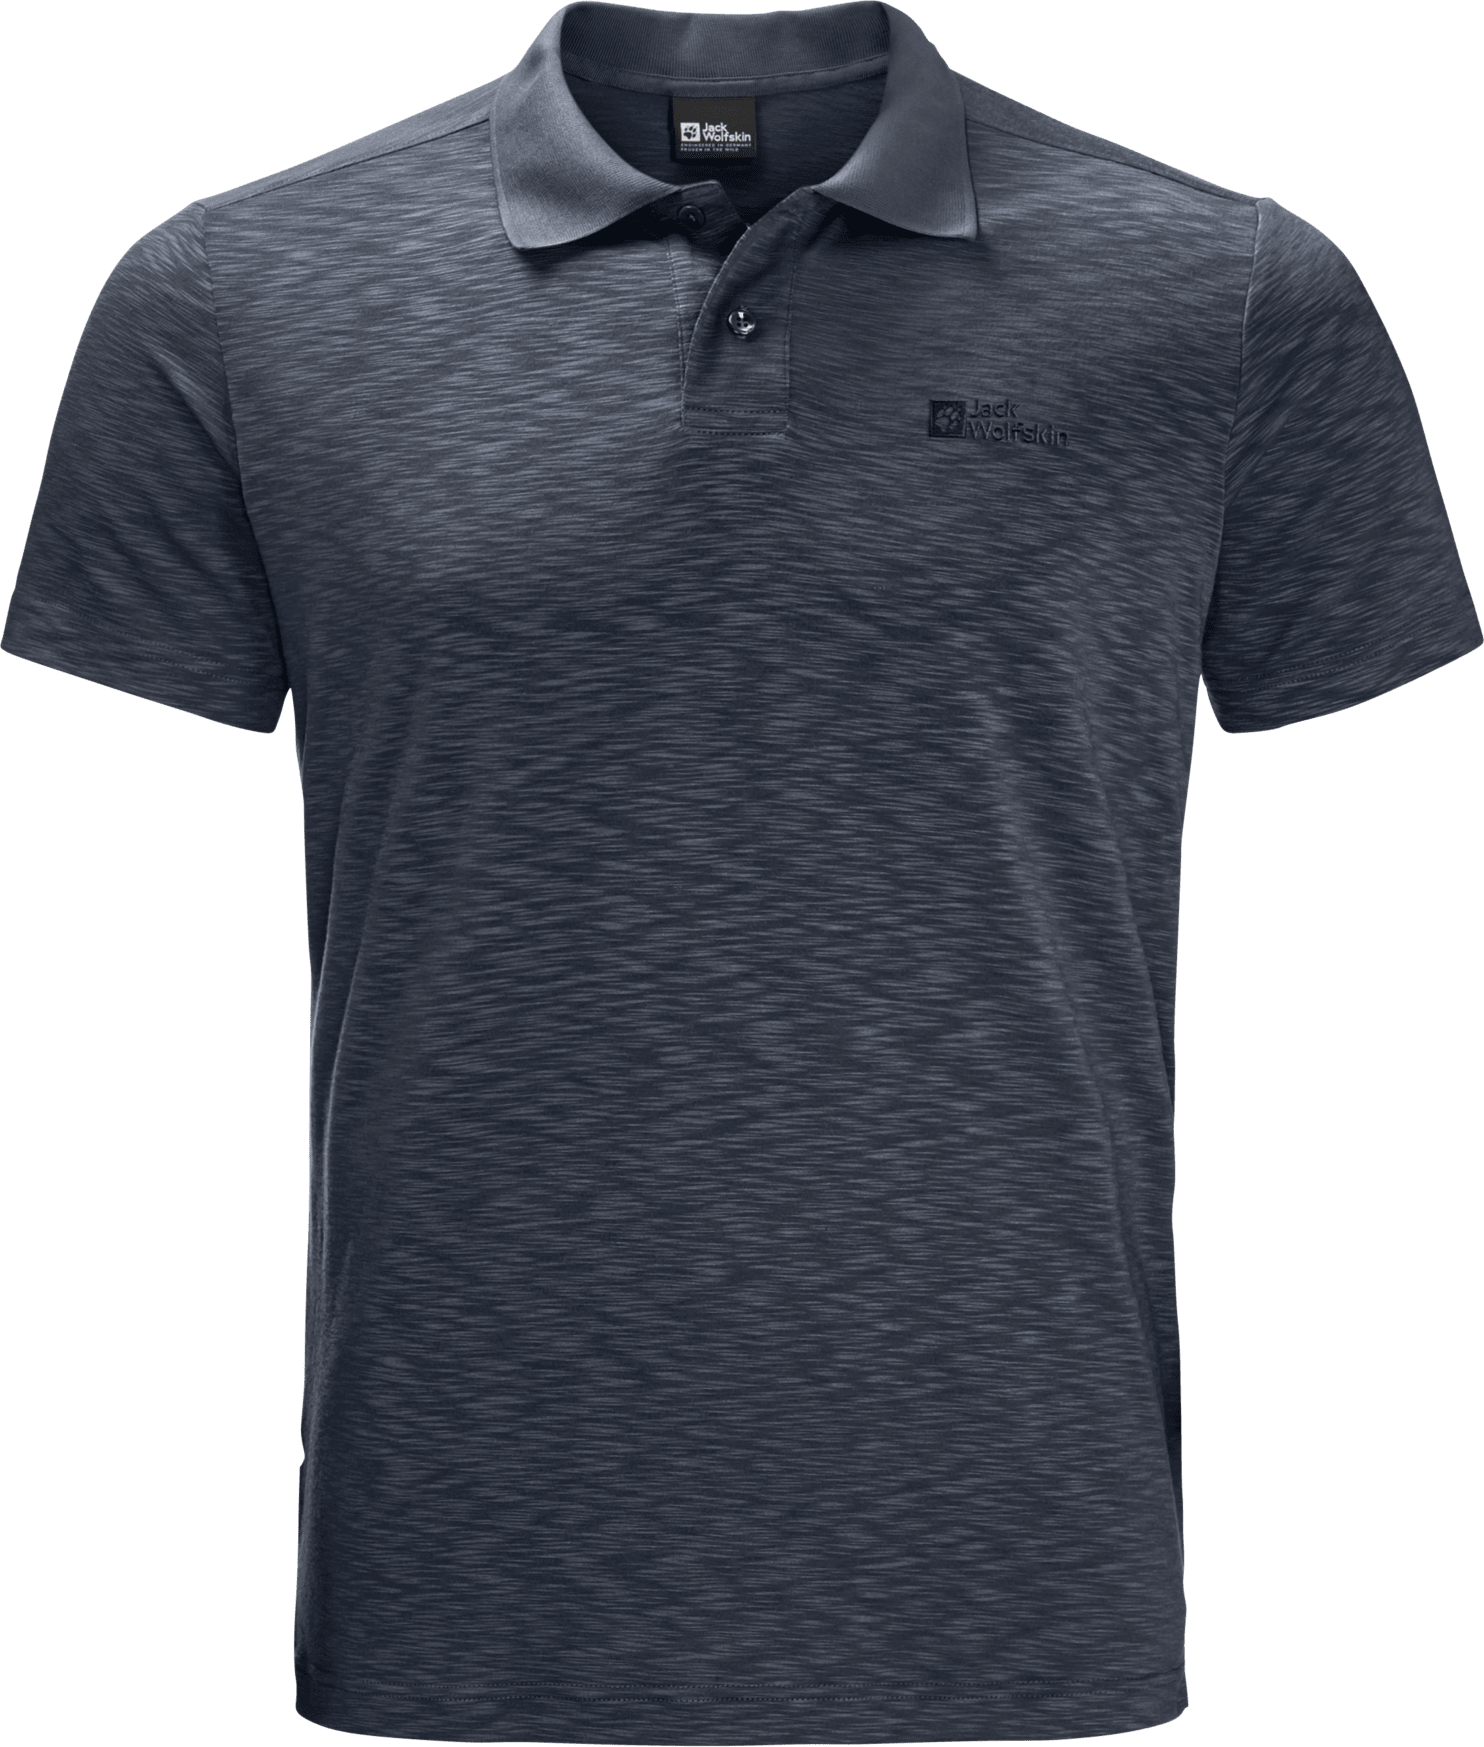 Buy Jack Wolfskin Men's Travel Polo from Outnorth